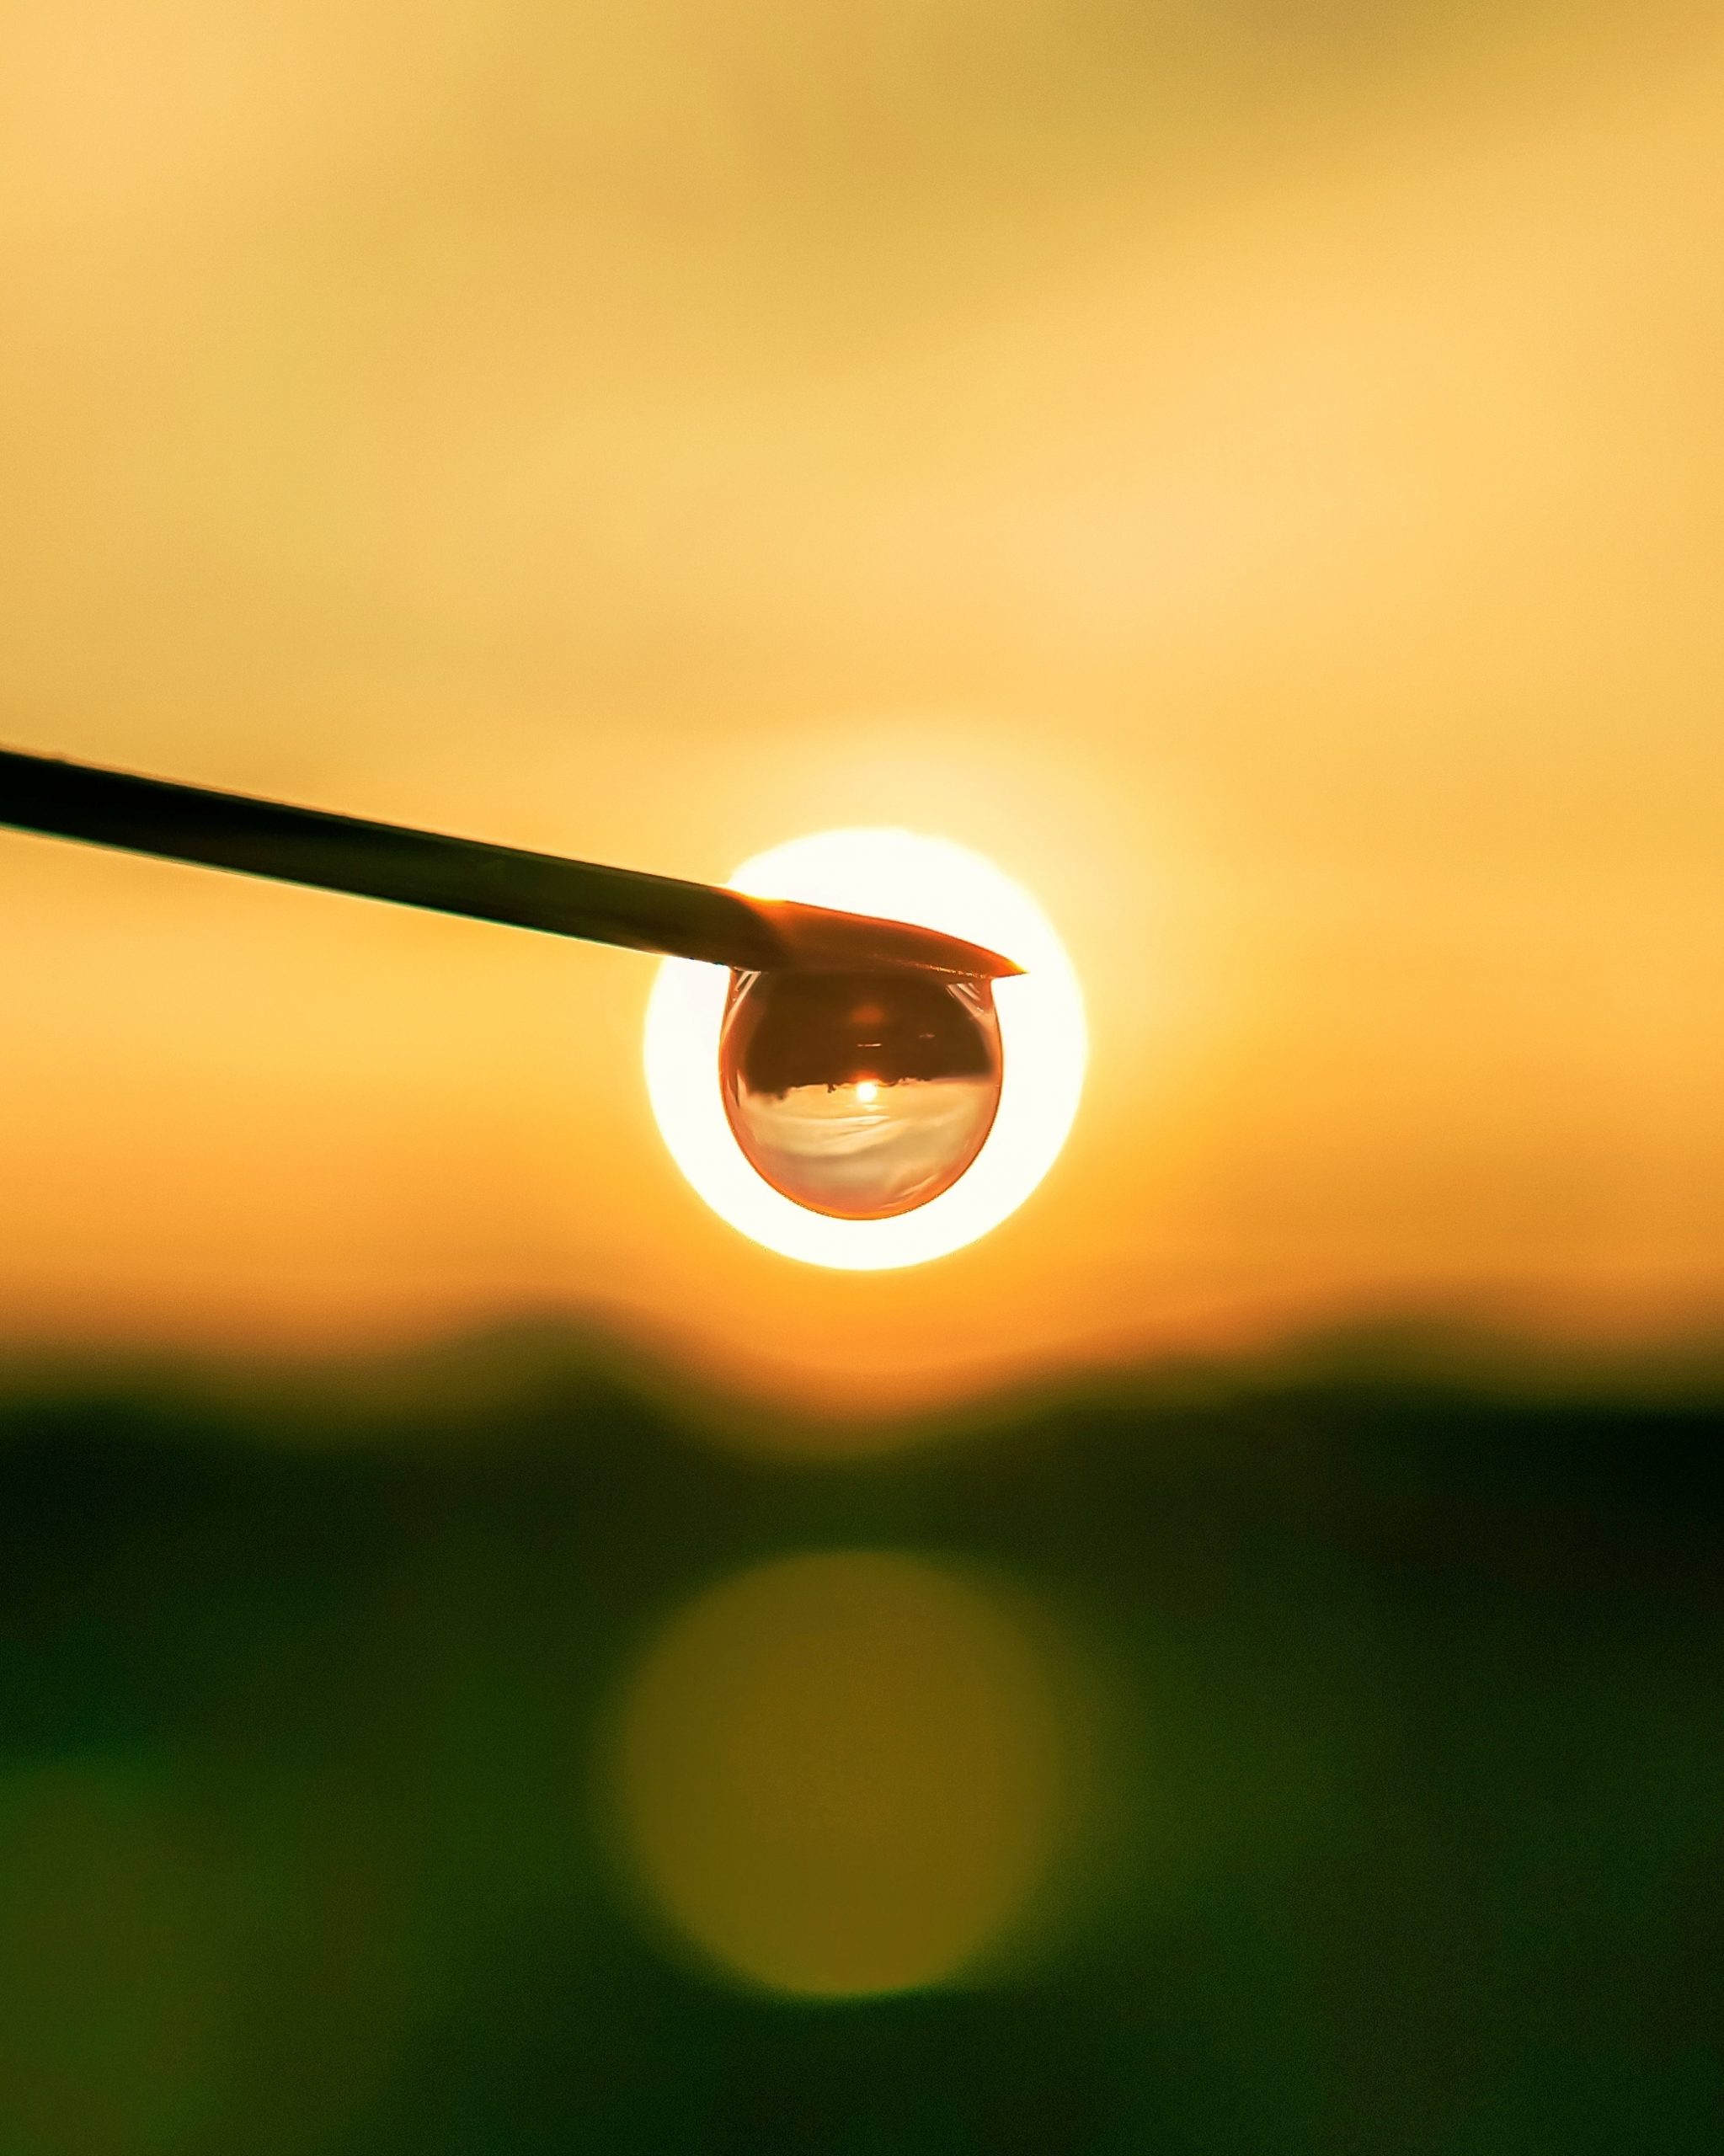 Reflection of sun in a drop